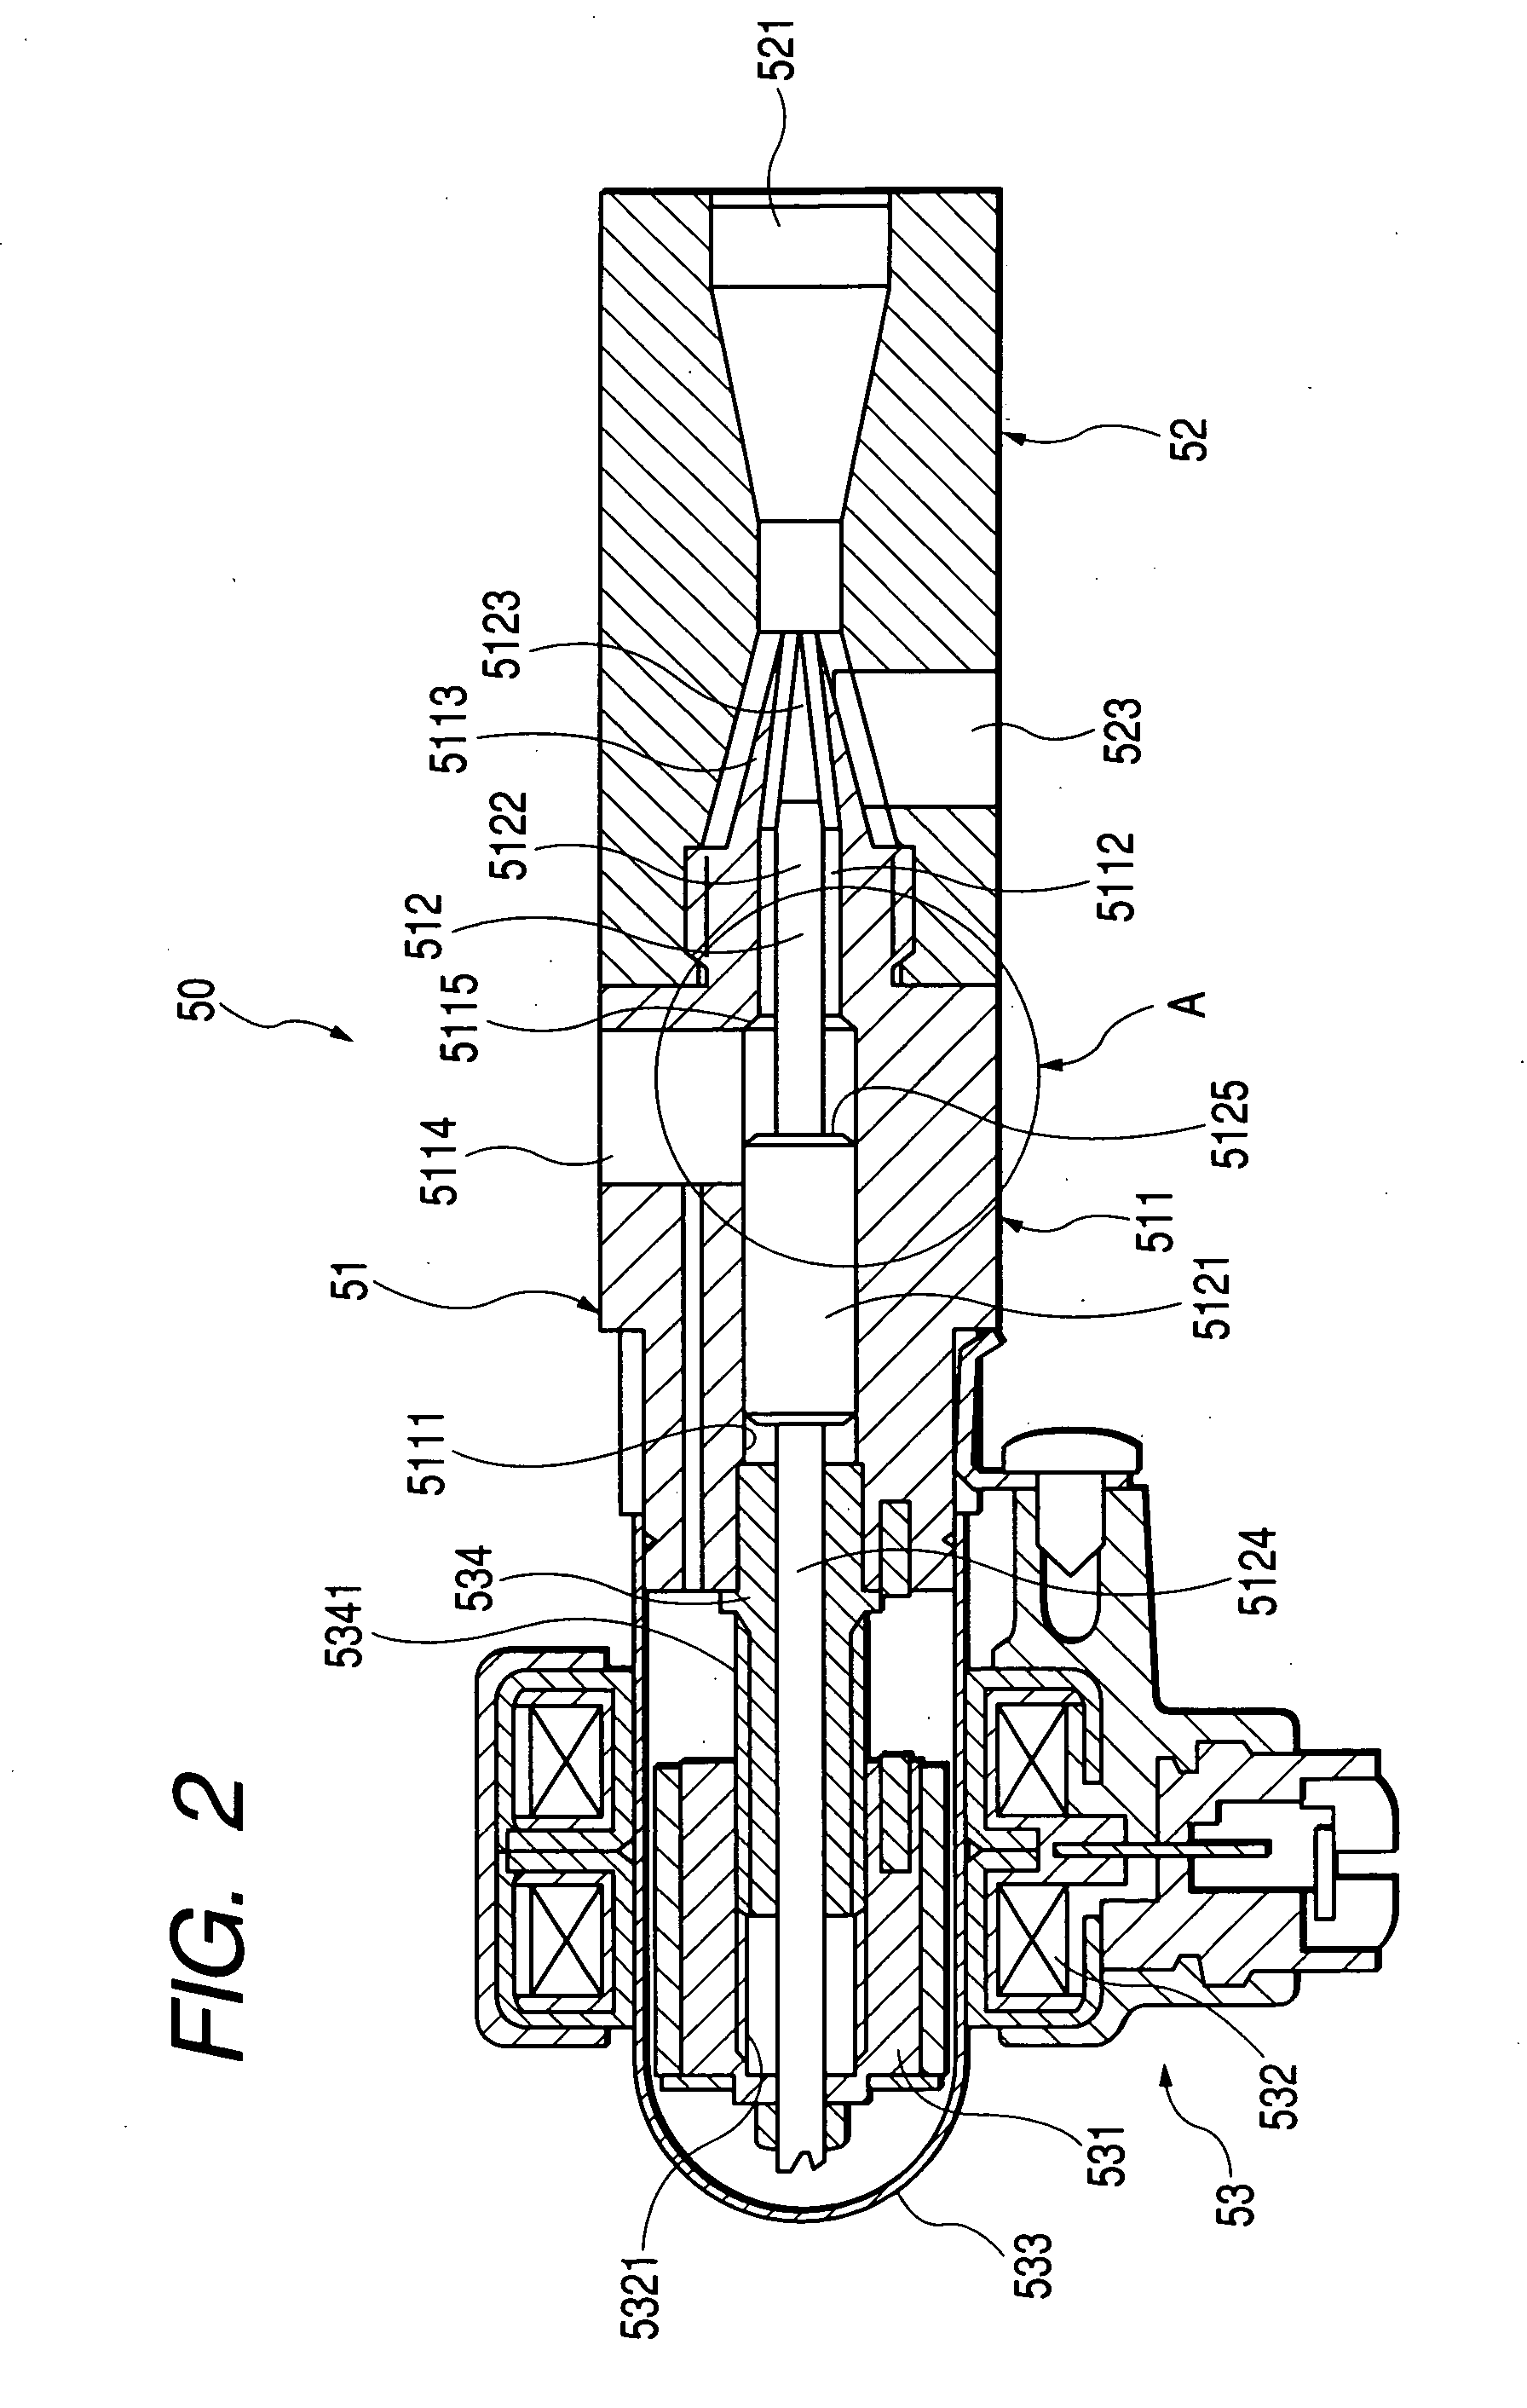 Structure of ejector pump